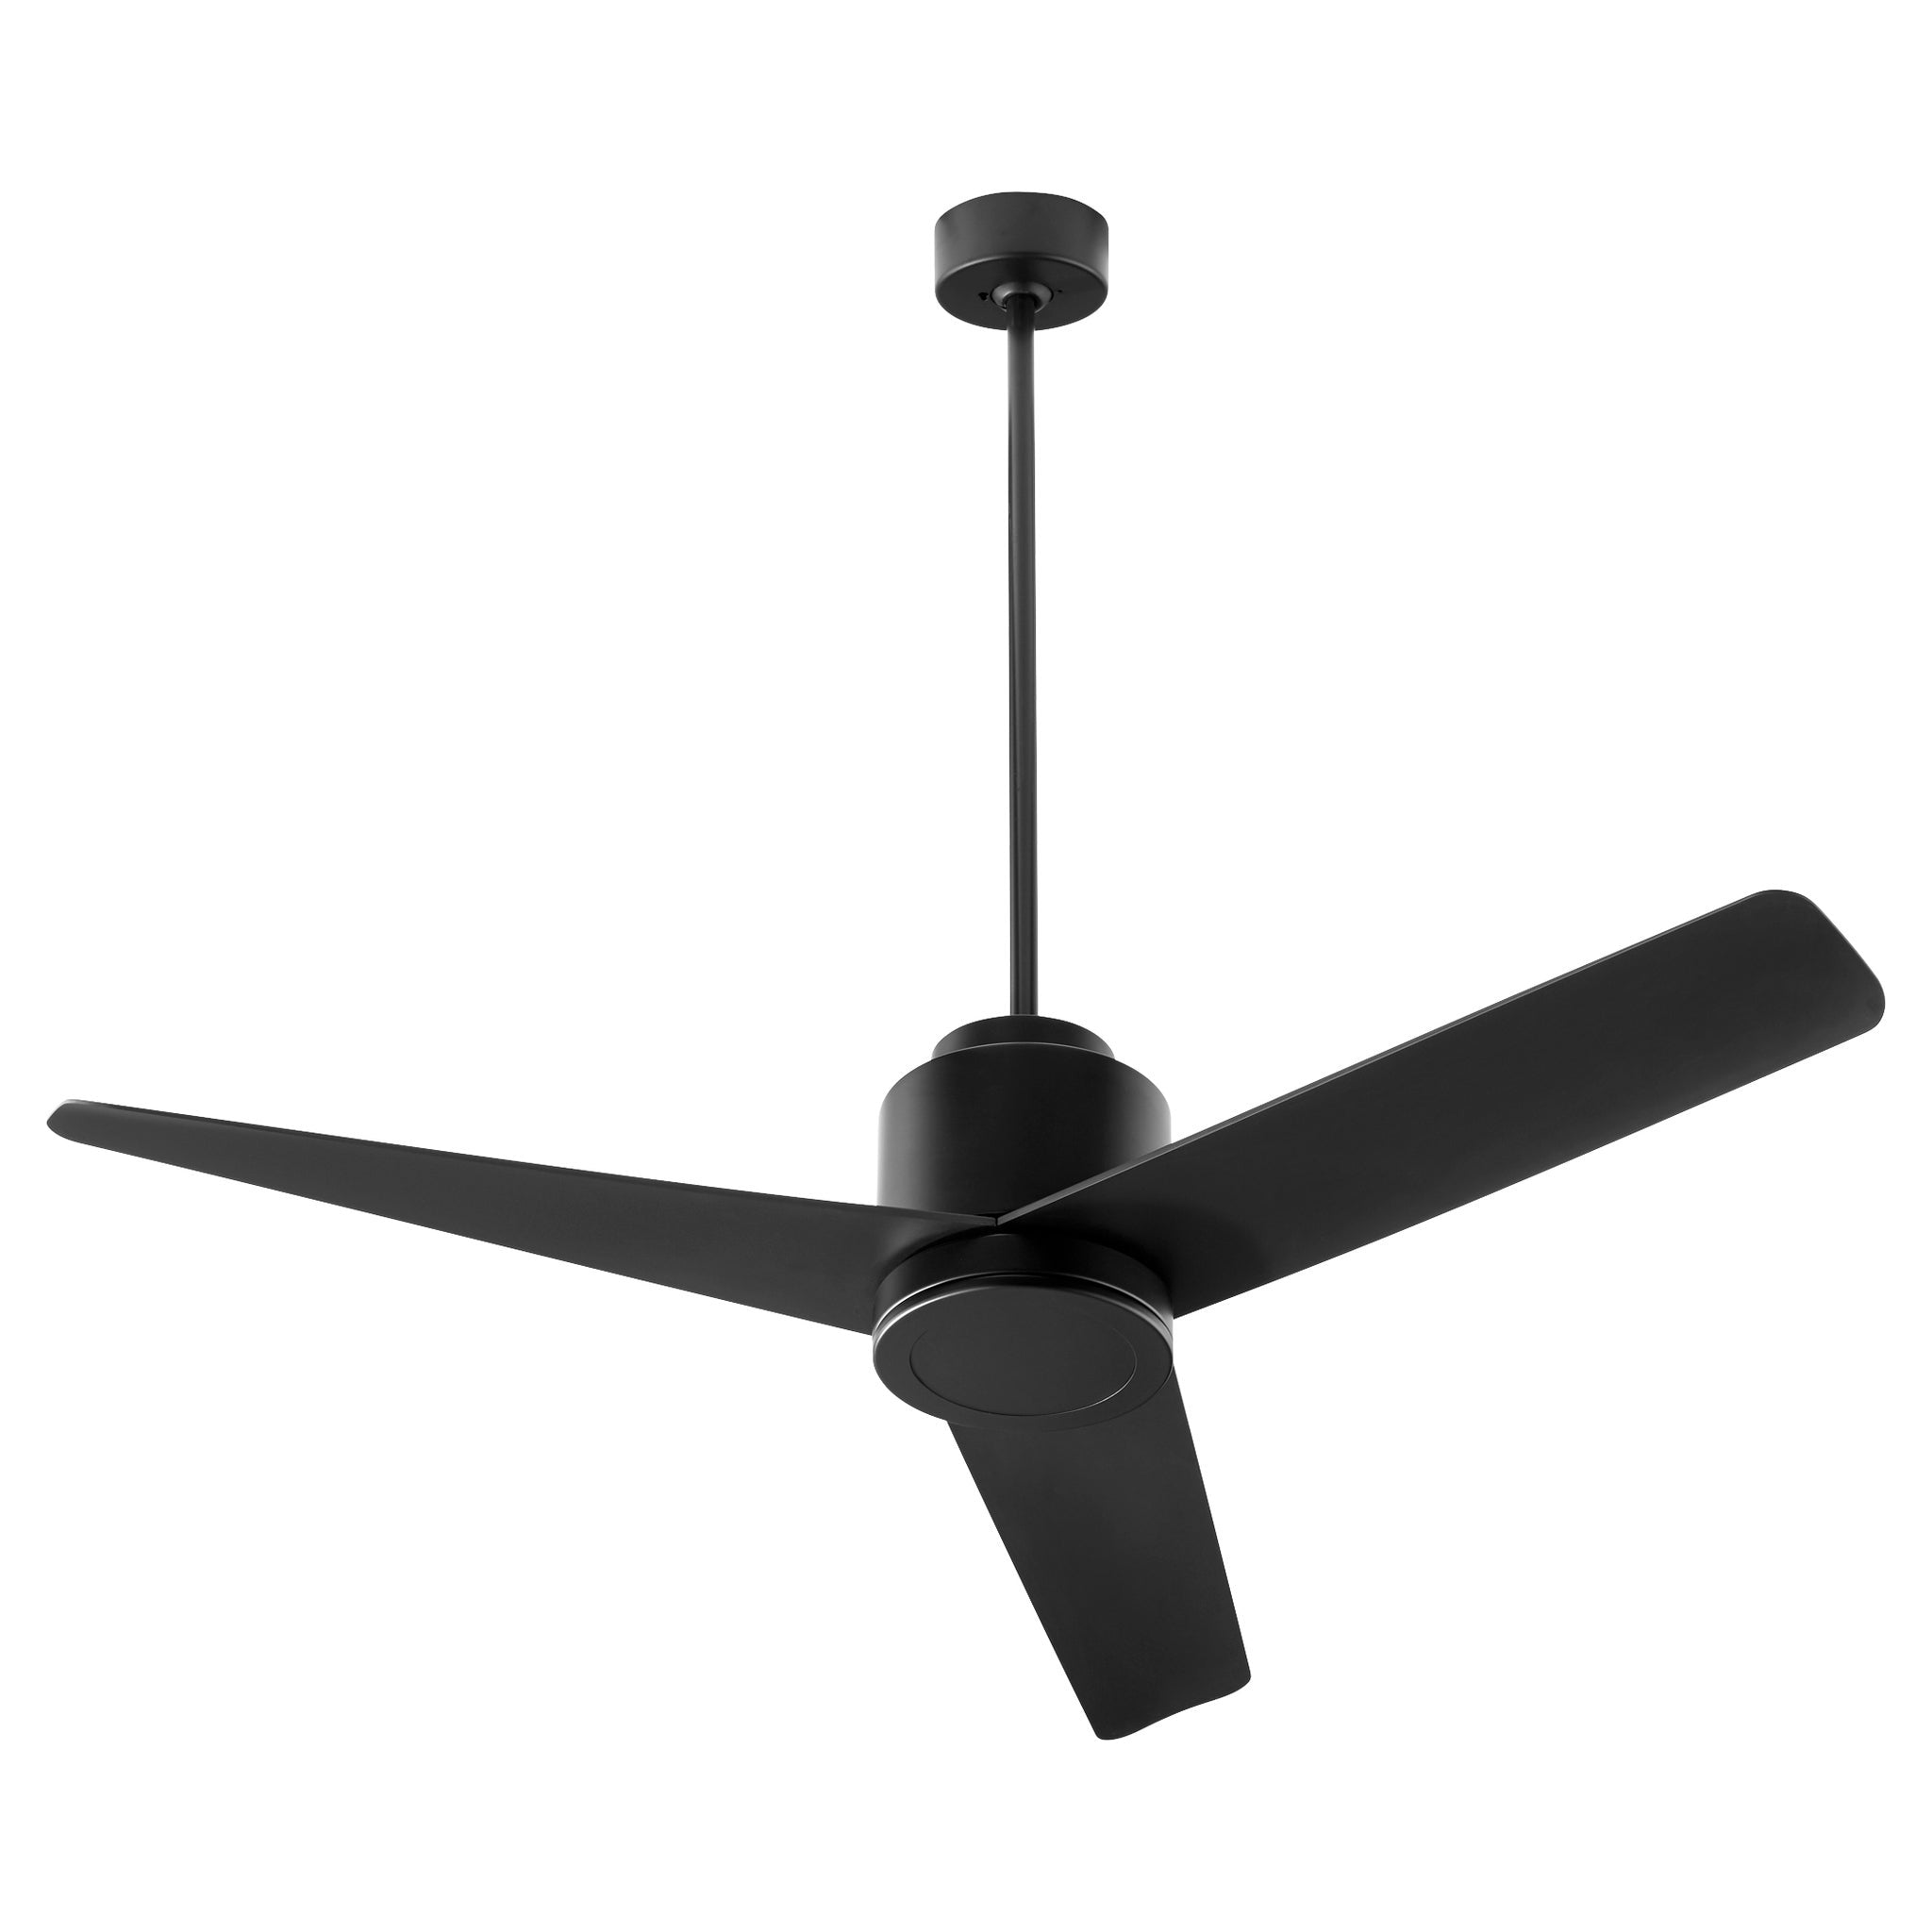 Oxygen ADORA Ceiling Fan, 52 Inch Blade Span, Wet Rated – Black, Satin Nickel, or White